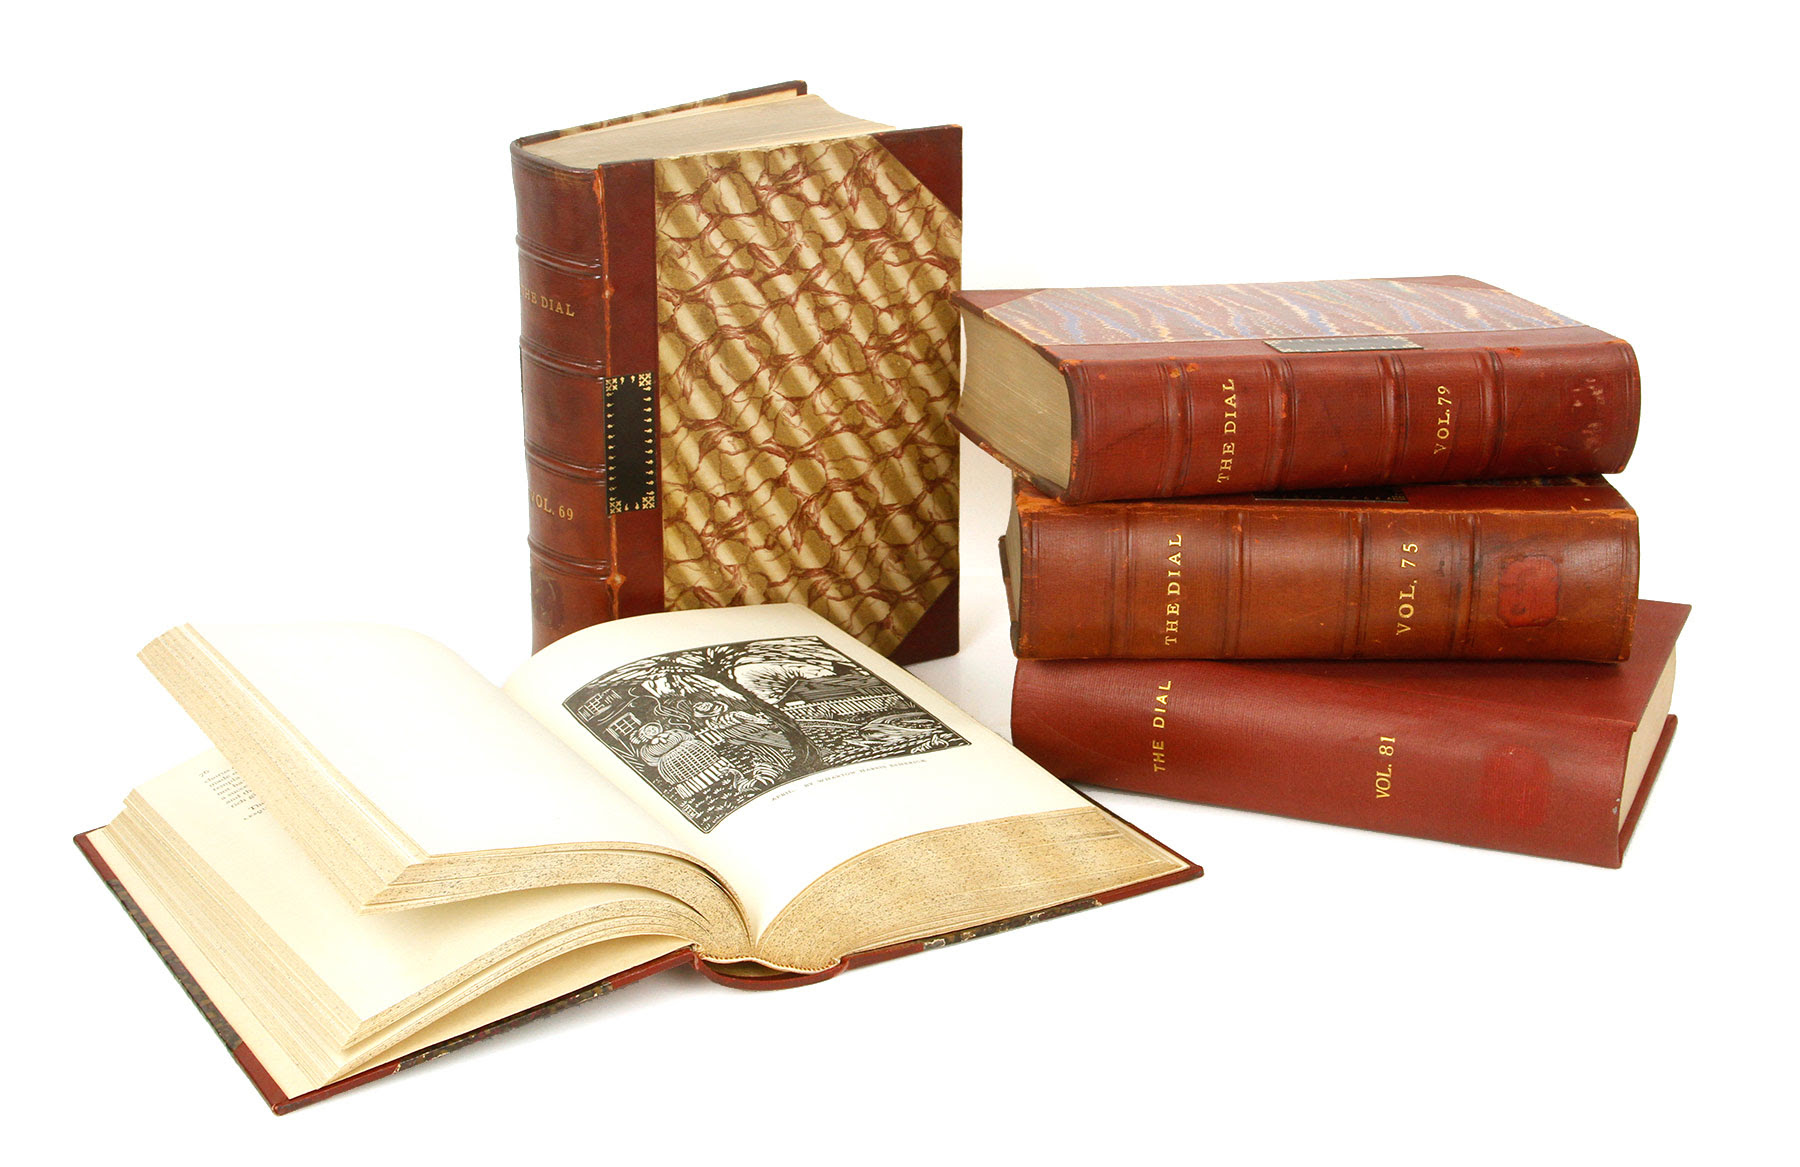 Scholarly books go to head of the class at Kaminski&#8217;s auction June 5